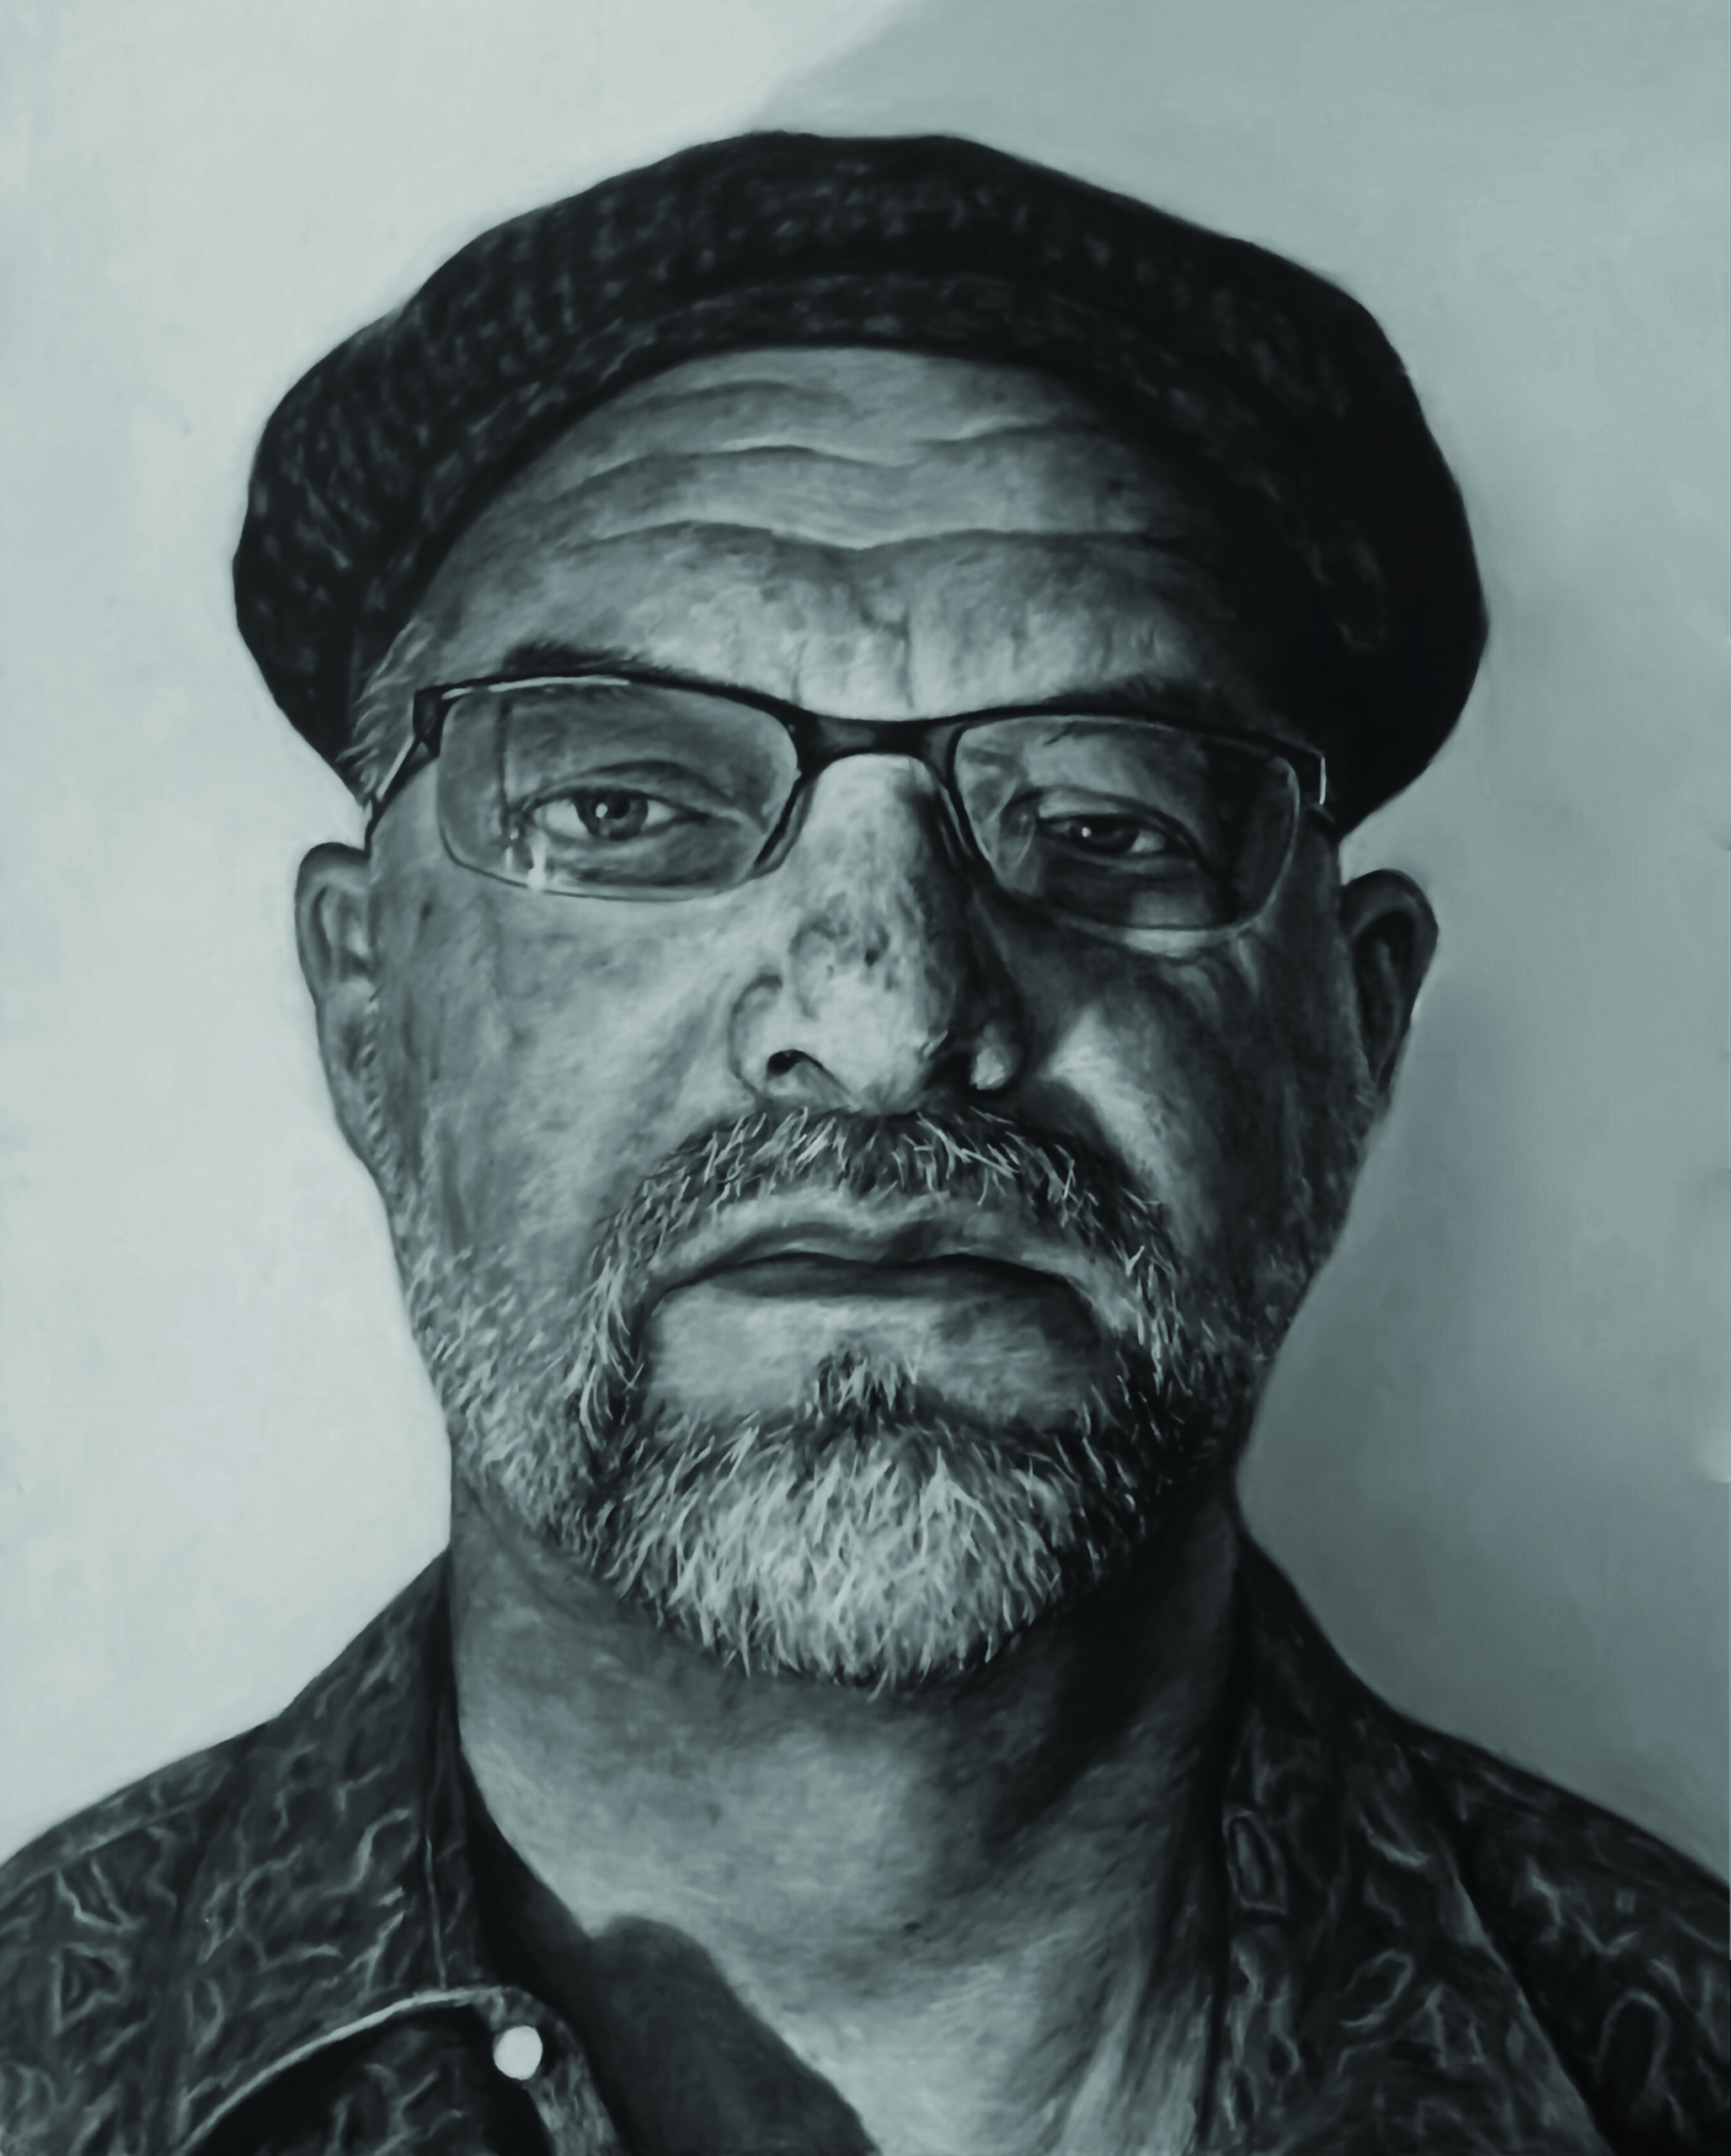 Jenna Ringuette (b. 2000), "Big Pat," 2021, charcoal on paper, 20 x 16 in., available through the artist 